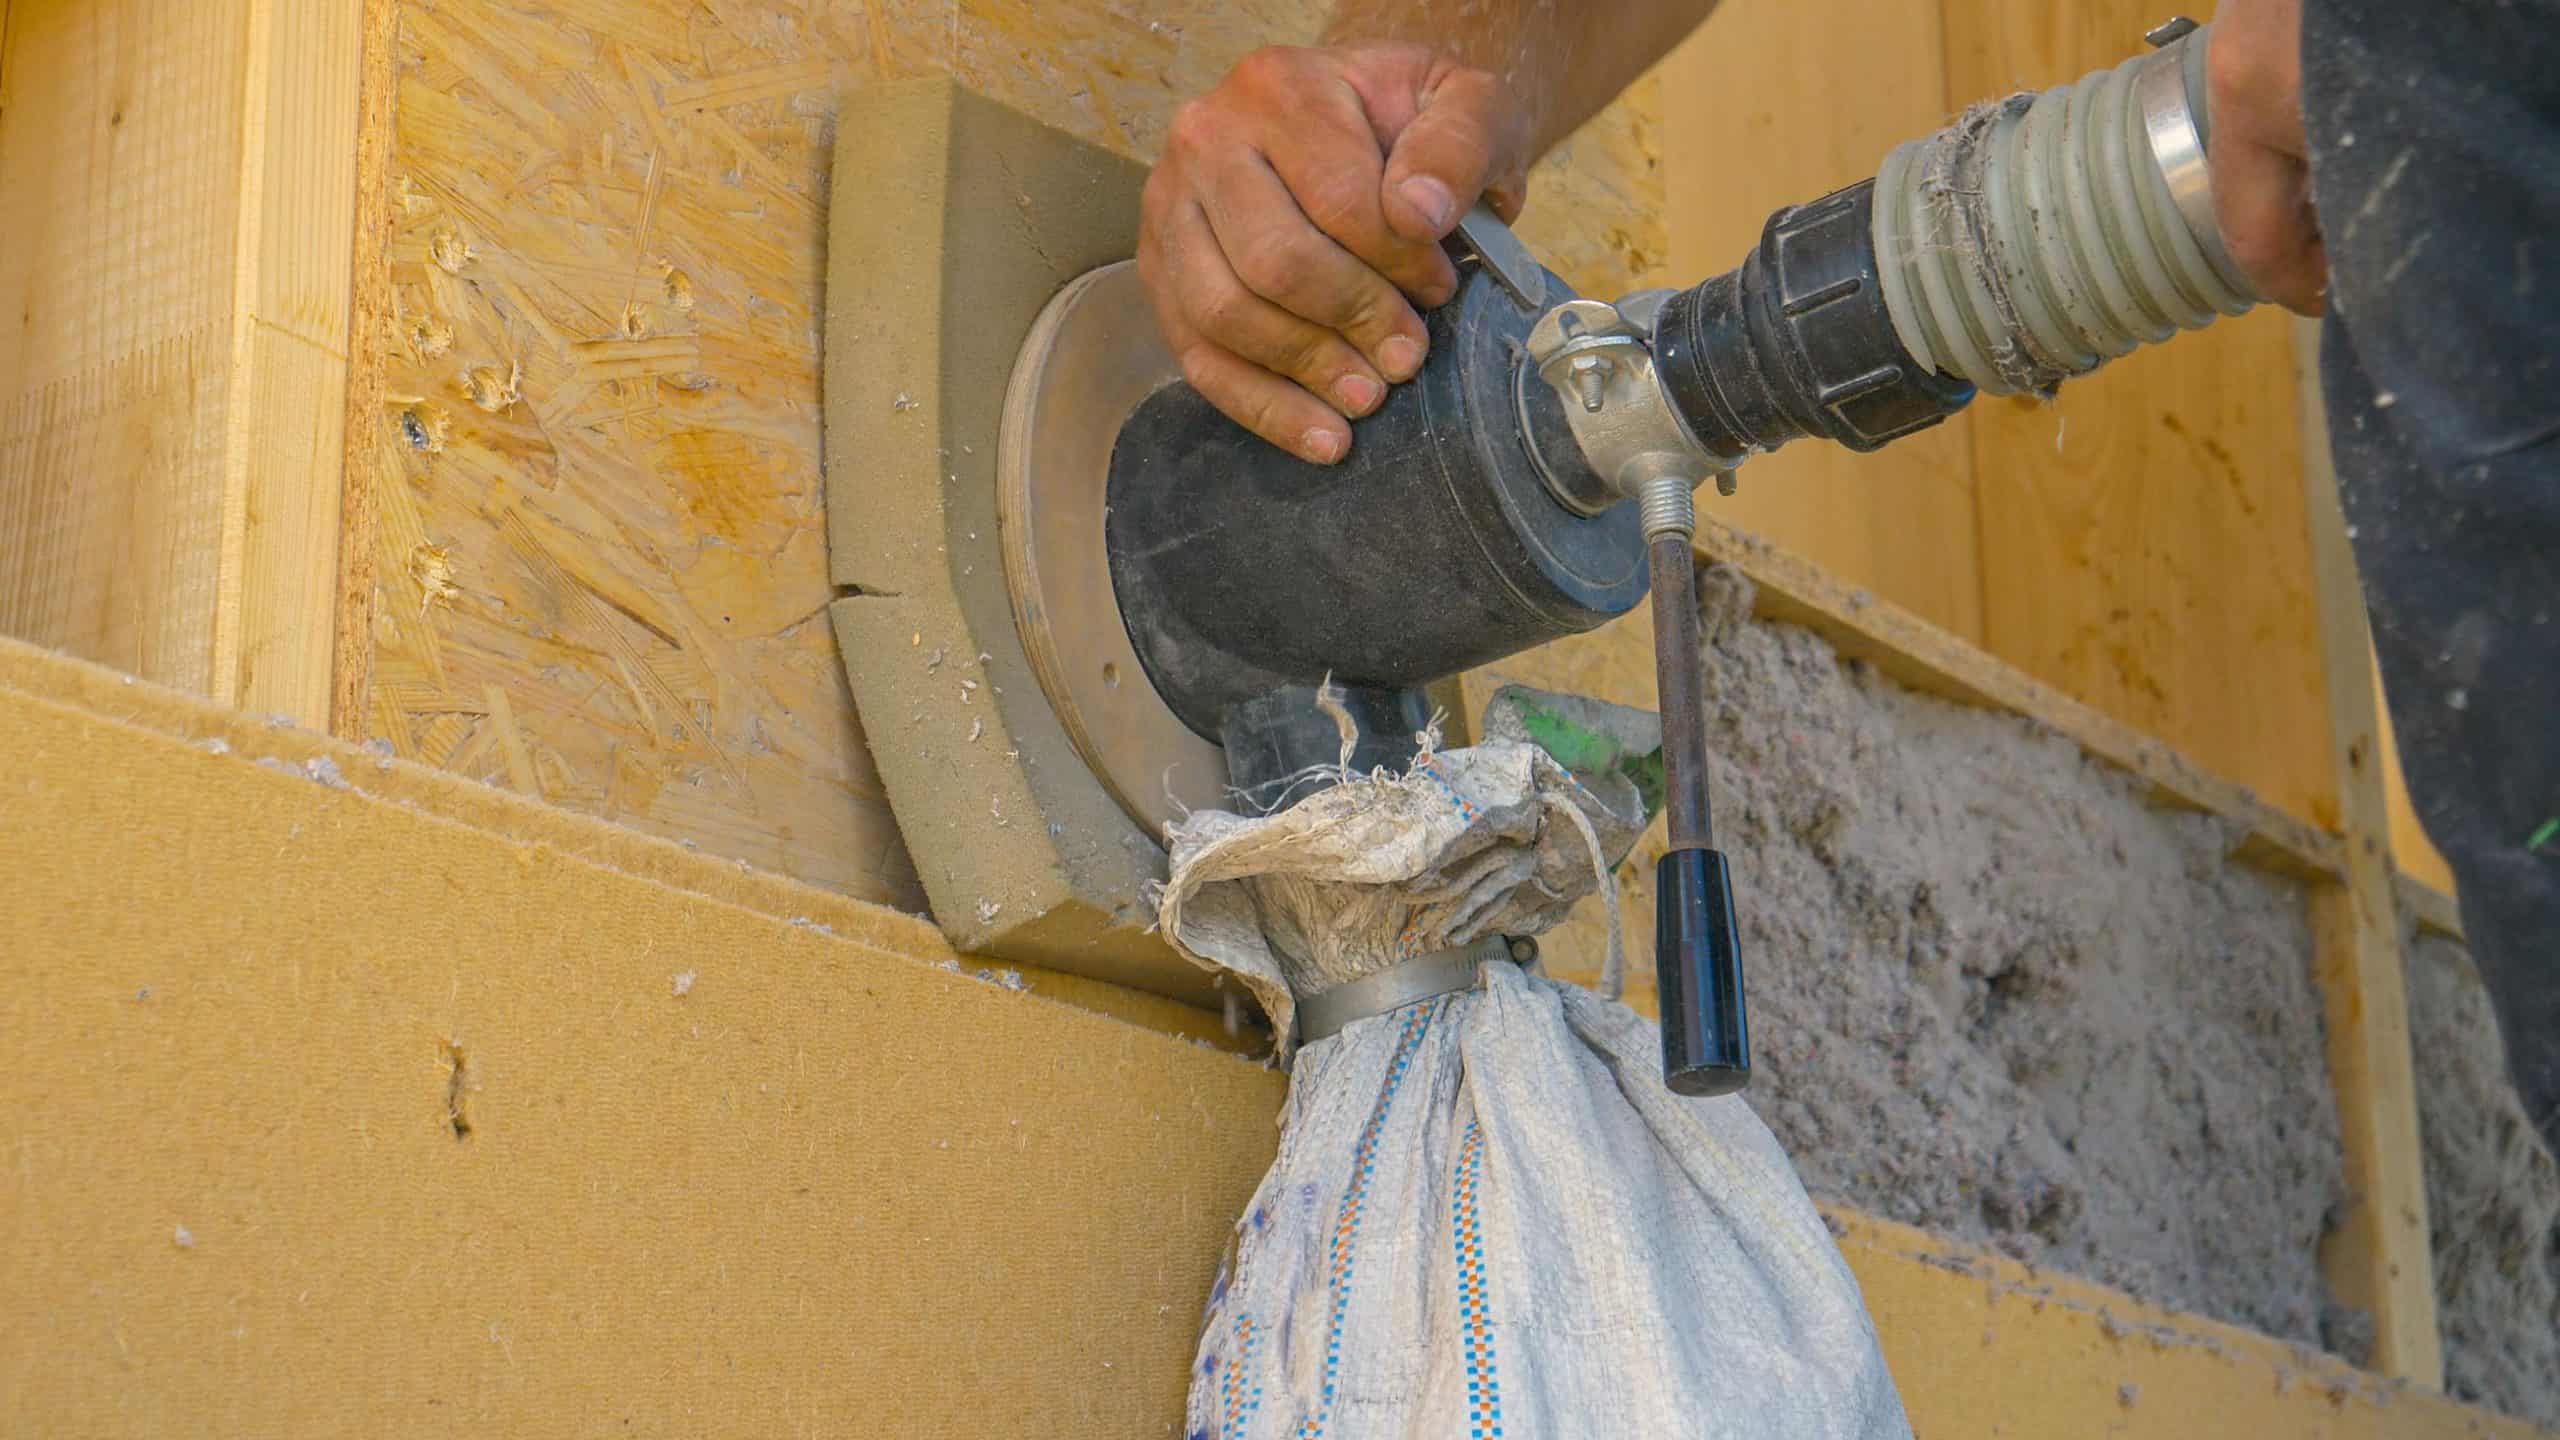 Builder uses a blower to insulate the wood wall with recycled paper